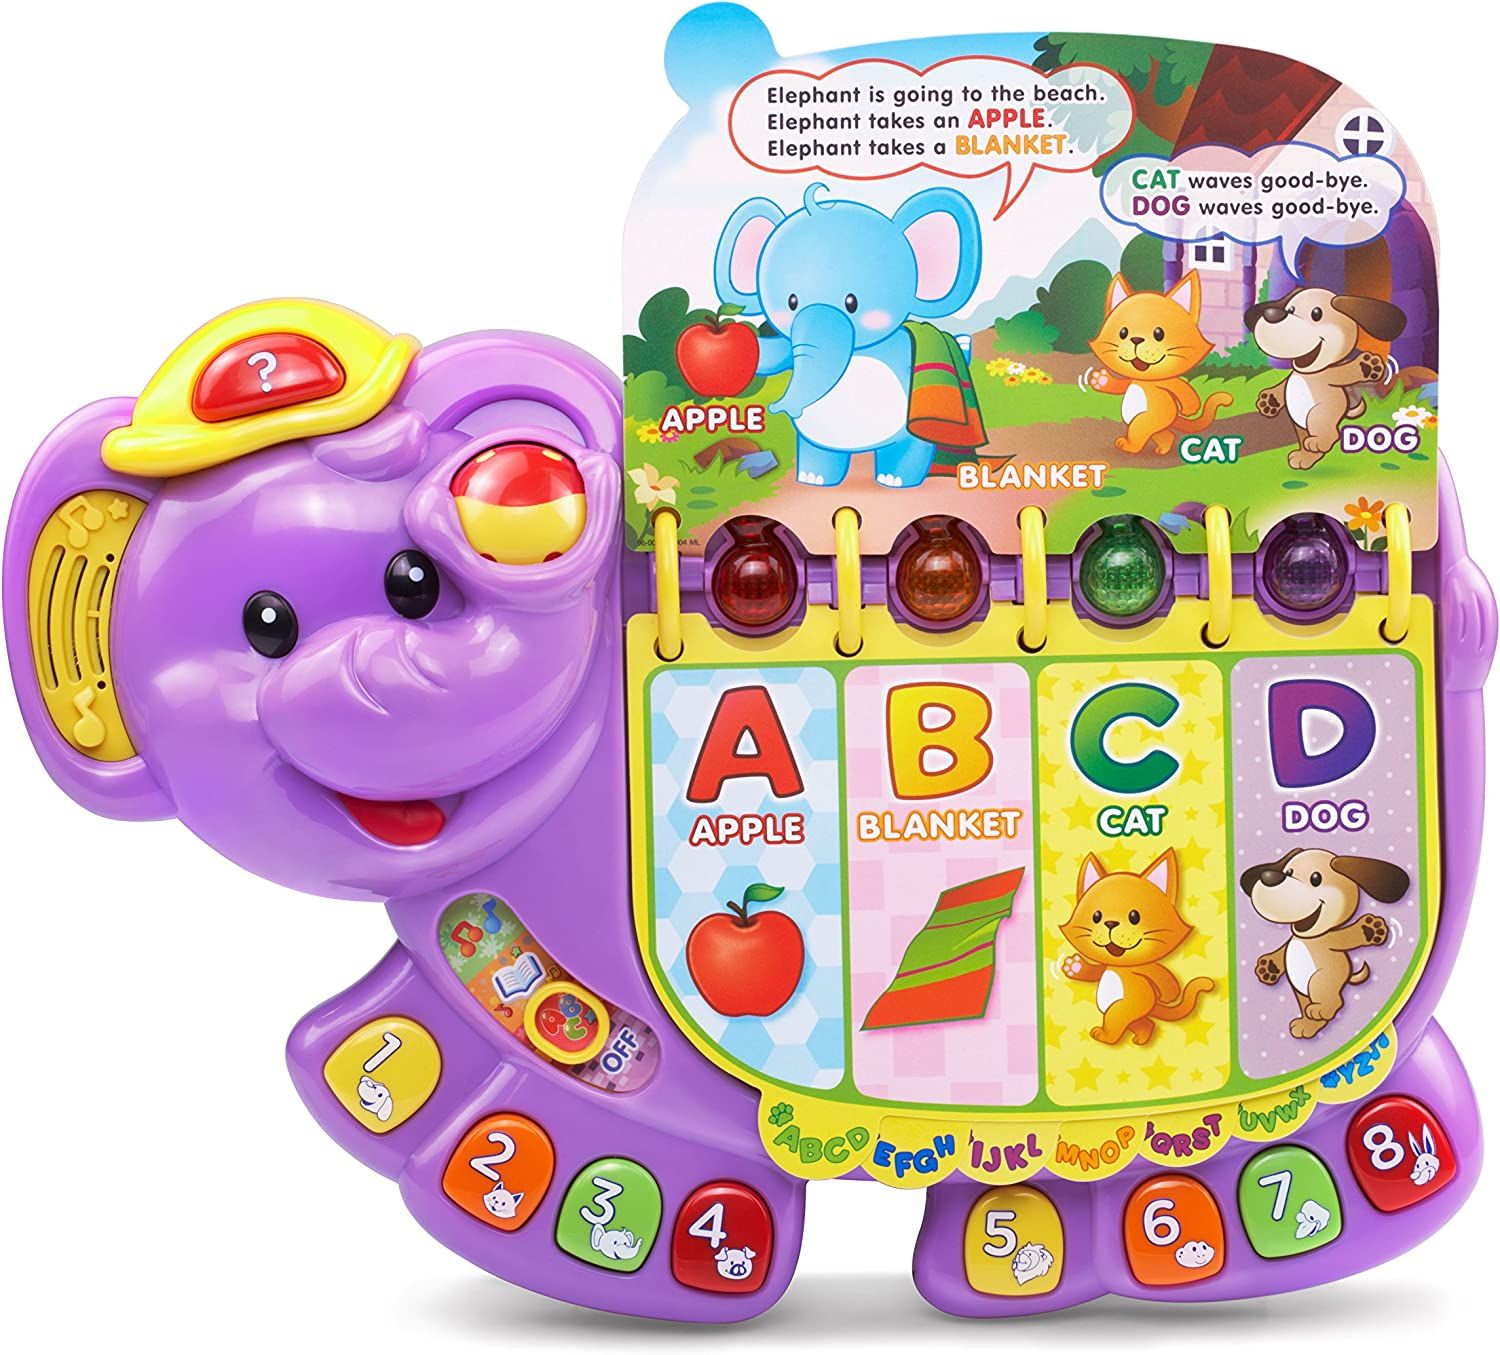 VTech Touch and Teach Elephant, Purple (Amazon Exclusive) 2